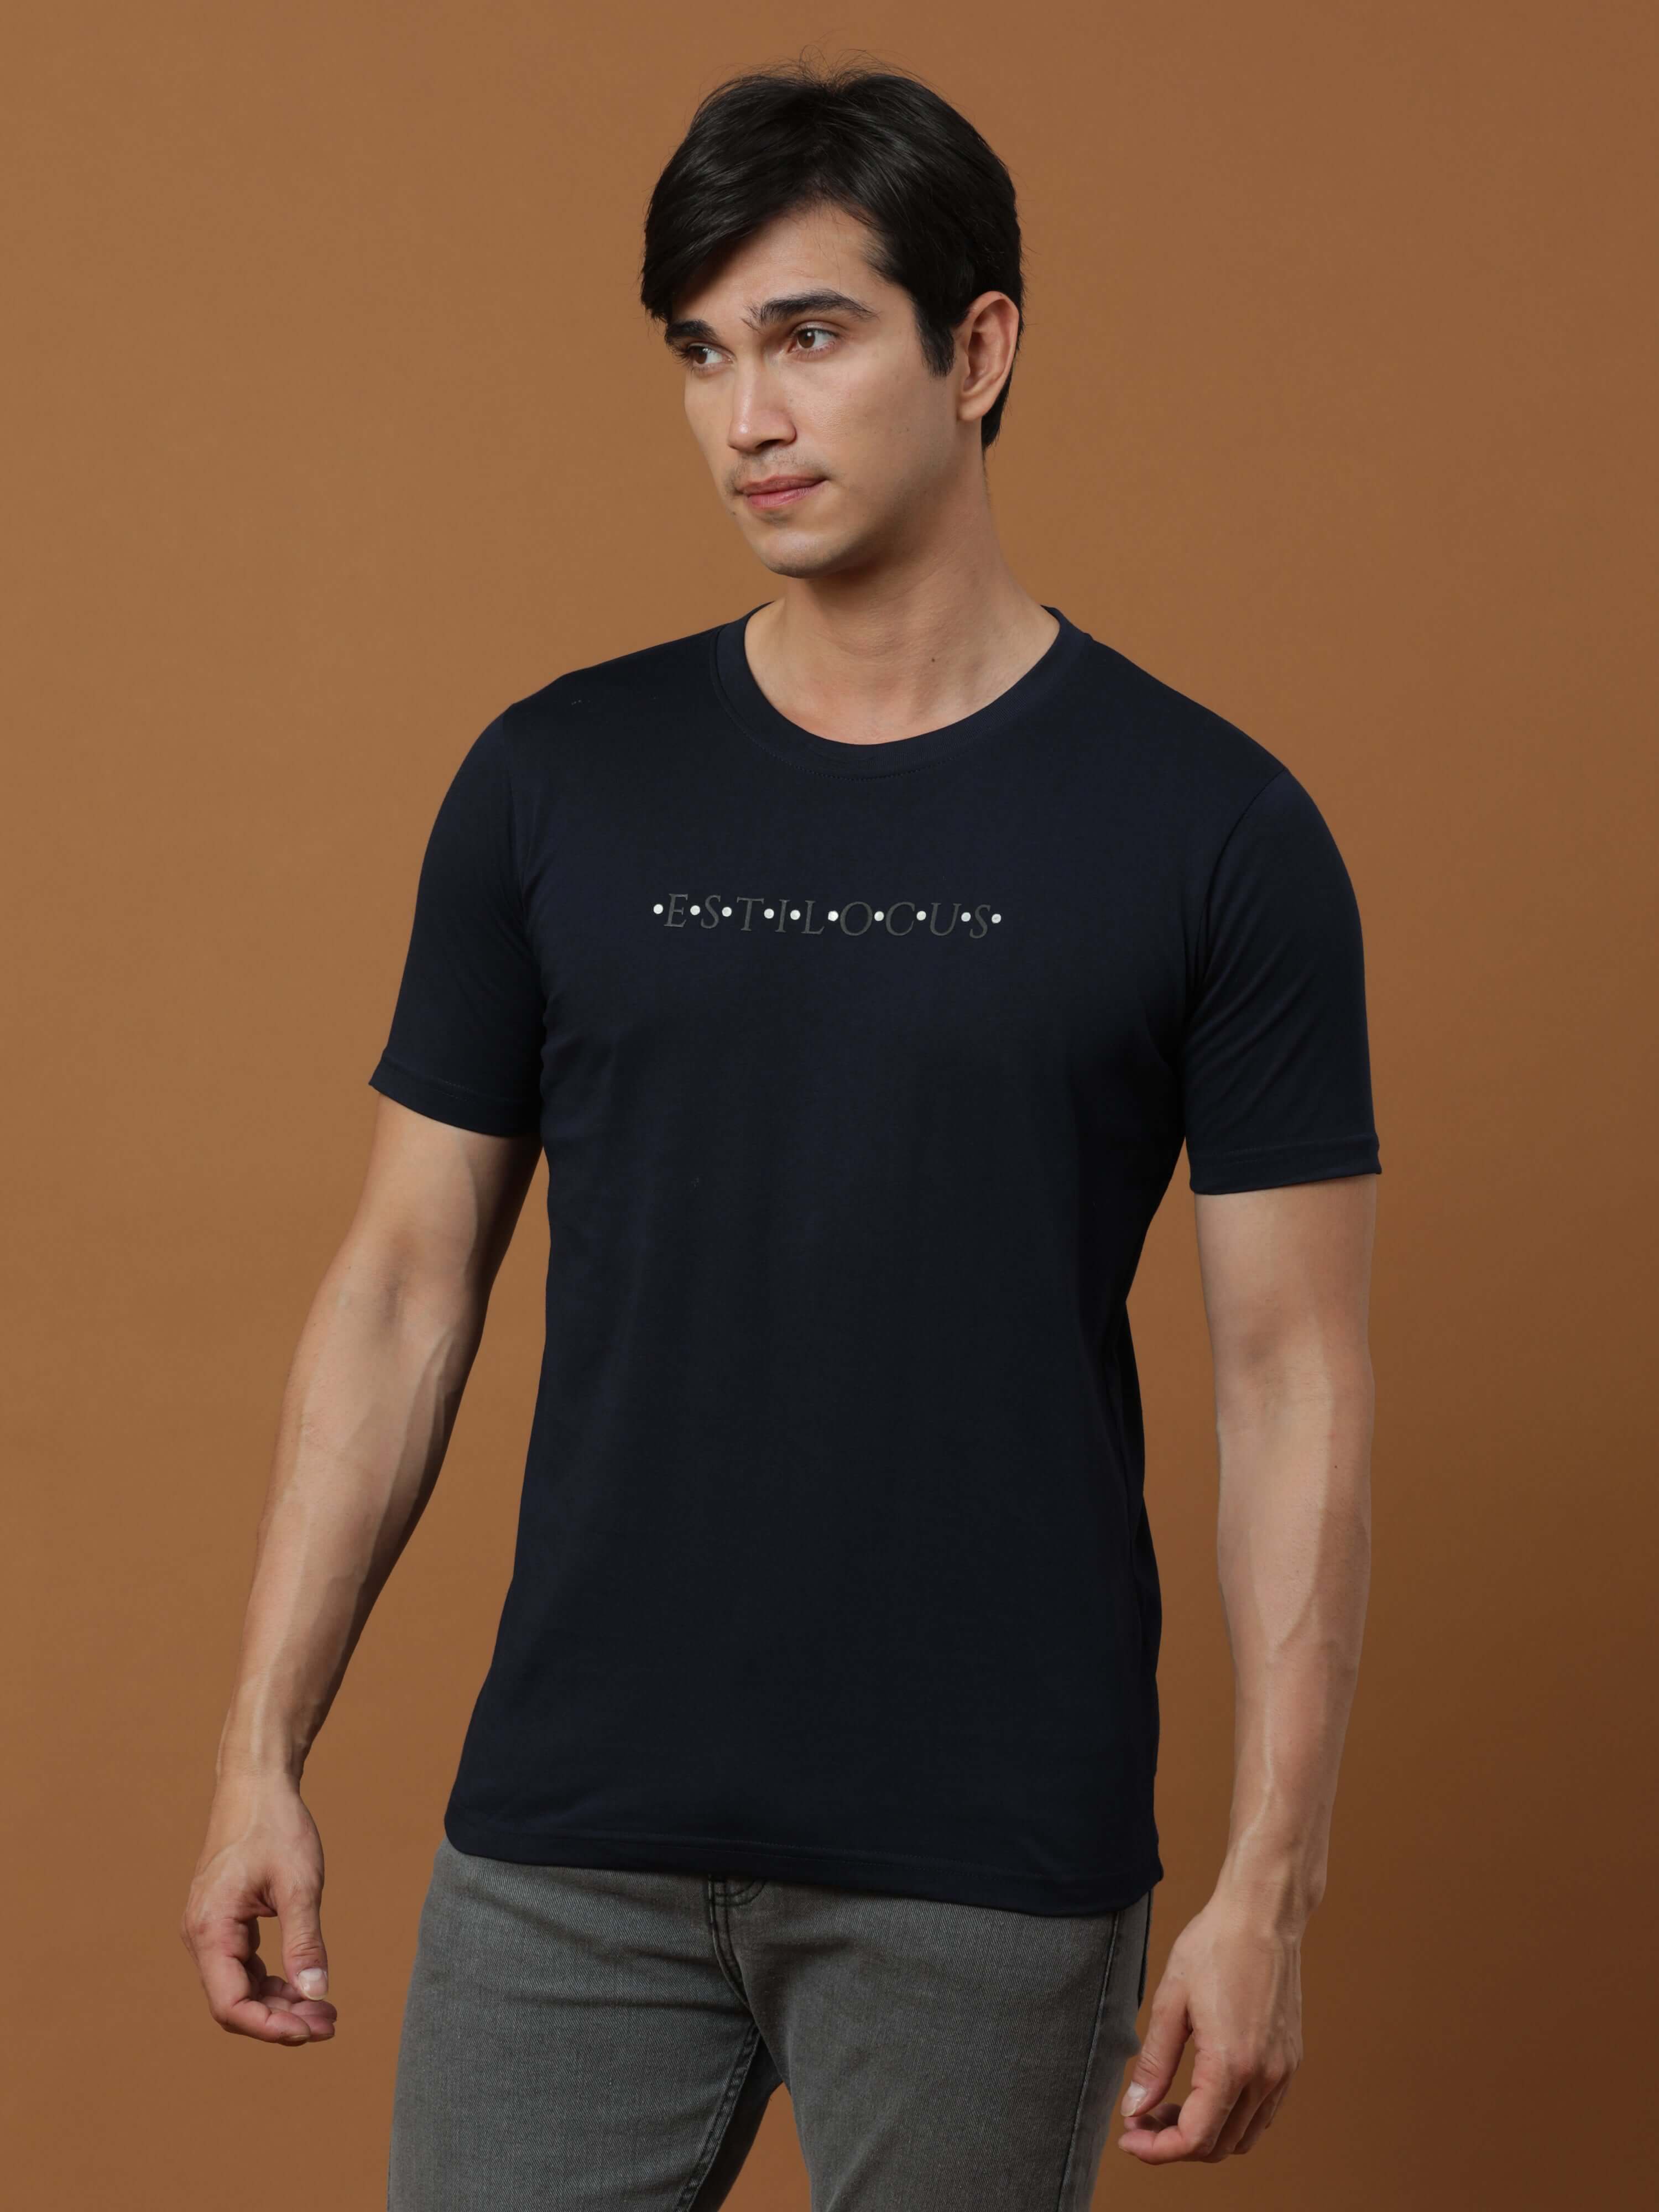 Navy Luminescent Printed T Shirt shop online at Estilocus. 100% Cotton Designed and printed on knitted fabric. The fabric is stretchy and lightweight, with a soft skin feel and no wrinkles. Crew neck collar which is smooth on the neck and keeps you comfor